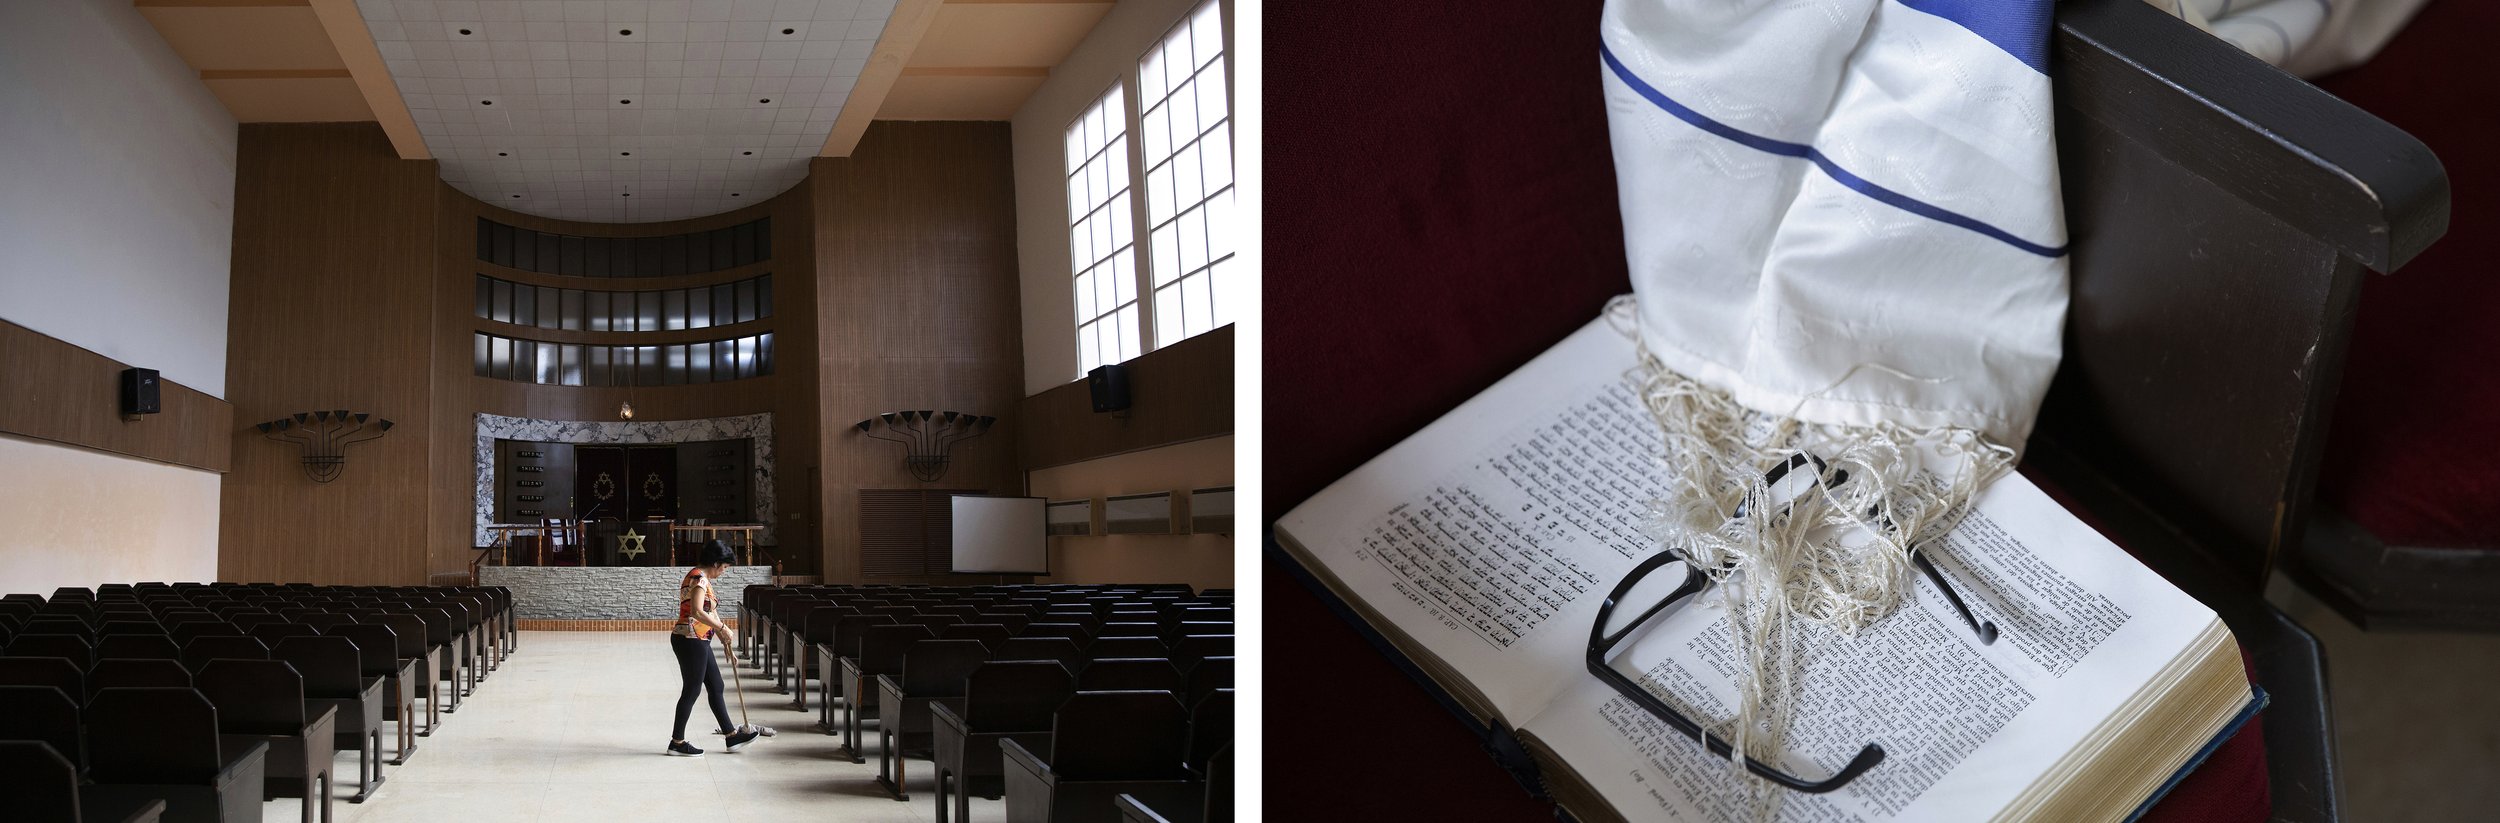  (LEFT) A volunteer sweeps the floor of the temple on January 16, 2020. (RIGHT) A pair of reading glasses rests upon a copy of the torah, underneath a tallit (a prayer shawl), at Beth Shalom on January 18, 2020. 